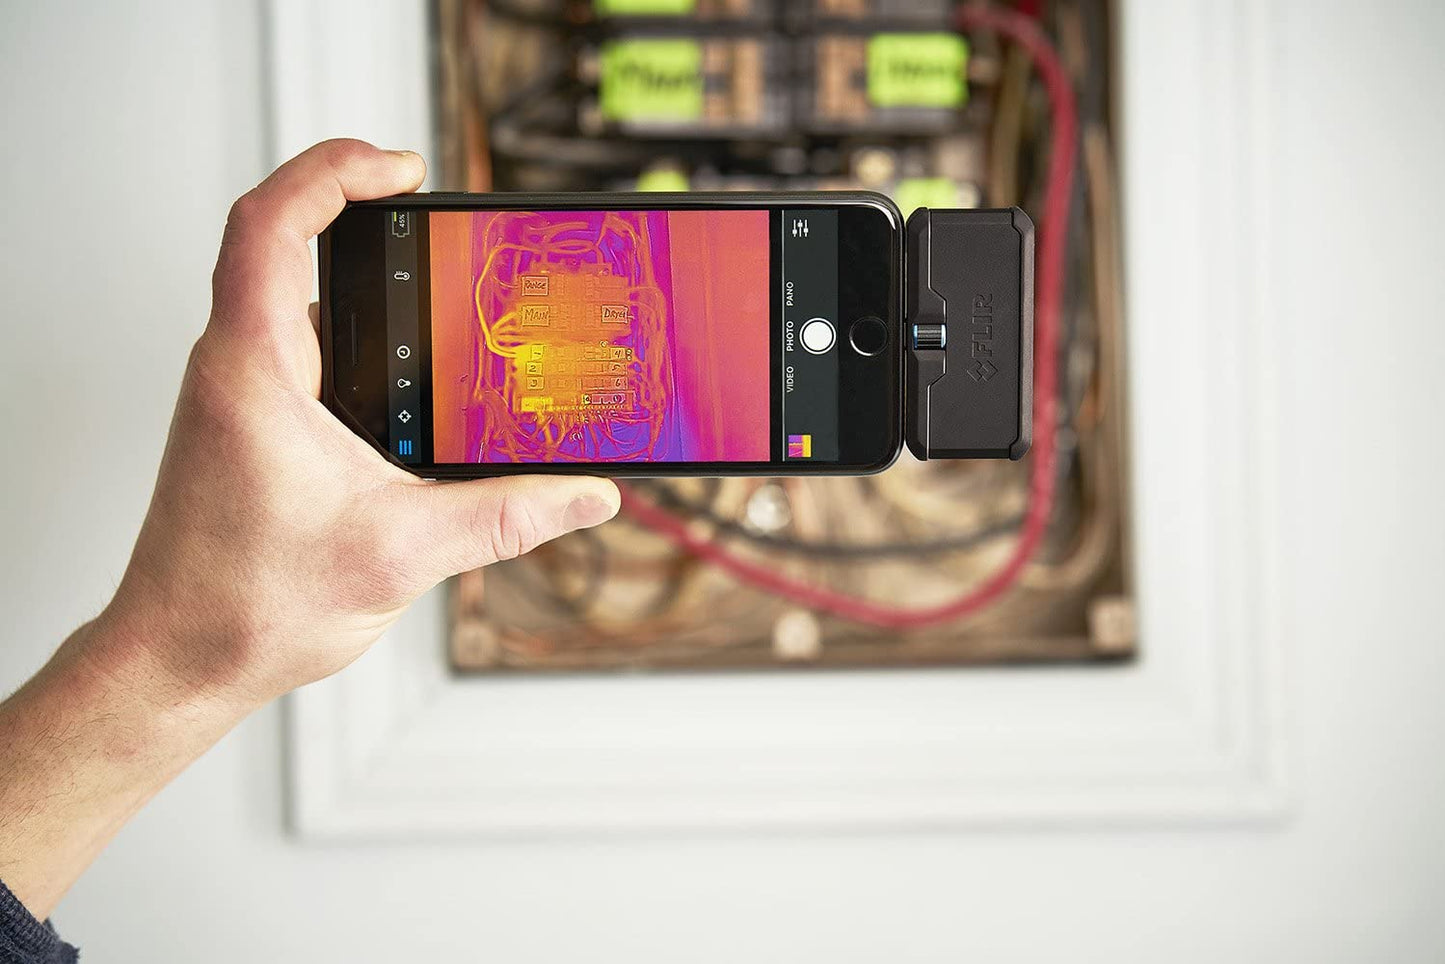 FLIR ONE Pro Thermal Imaging Camera for iOS